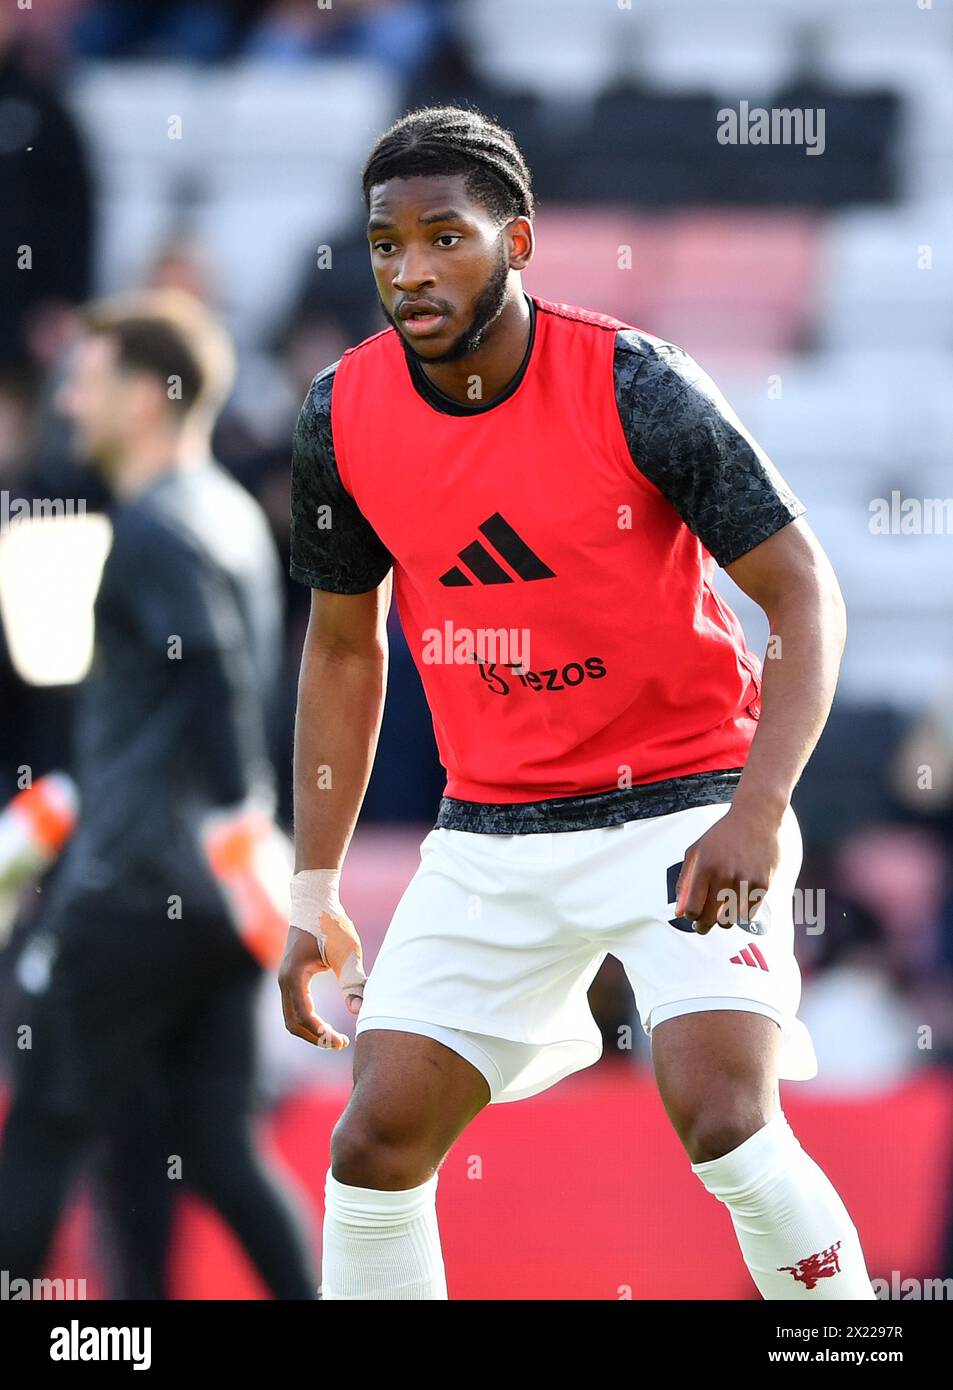 Willy Kambwala de Manchester United WARMS Up - AFC Bournemouth v Manchester United, premier League, Vitality Stadium, Bournemouth, Royaume-Uni - 13 avril 2024 usage éditorial uniquement - des restrictions DataCo s'appliquent Banque D'Images